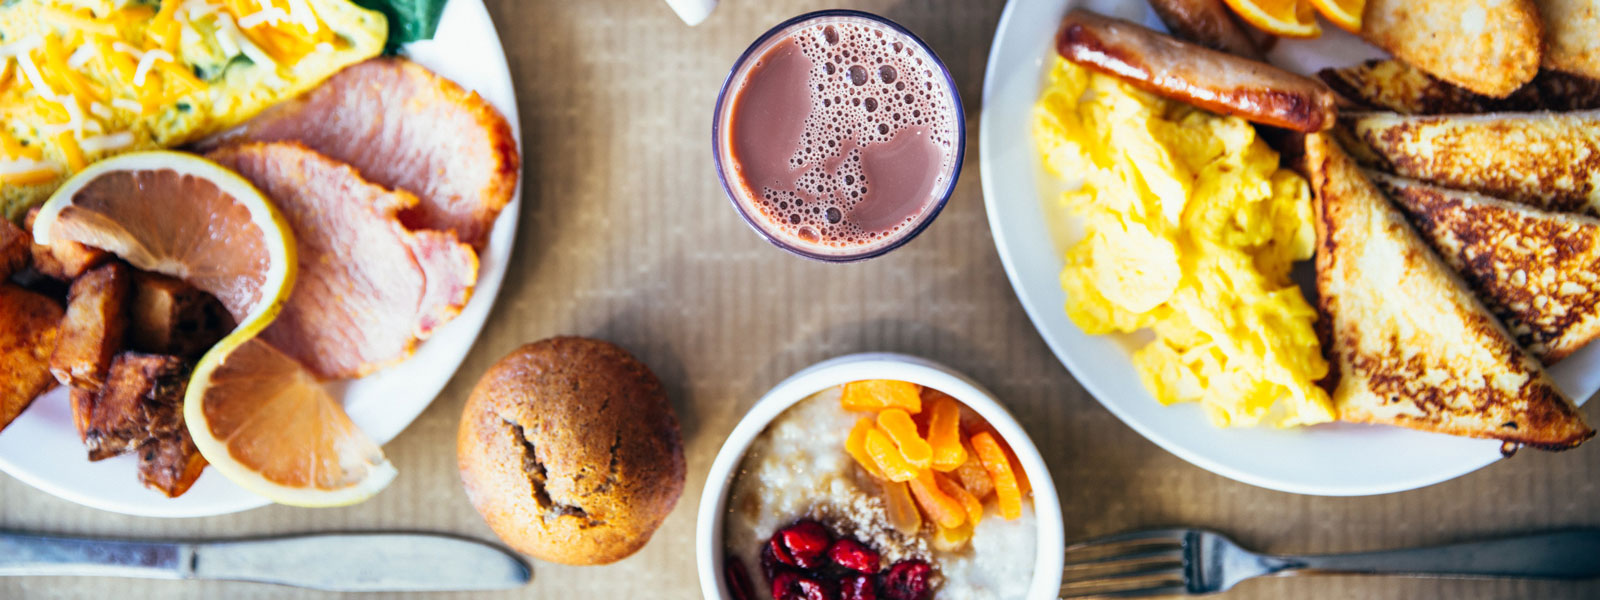 Best Foods To Eat For Breakfast Before Race Day